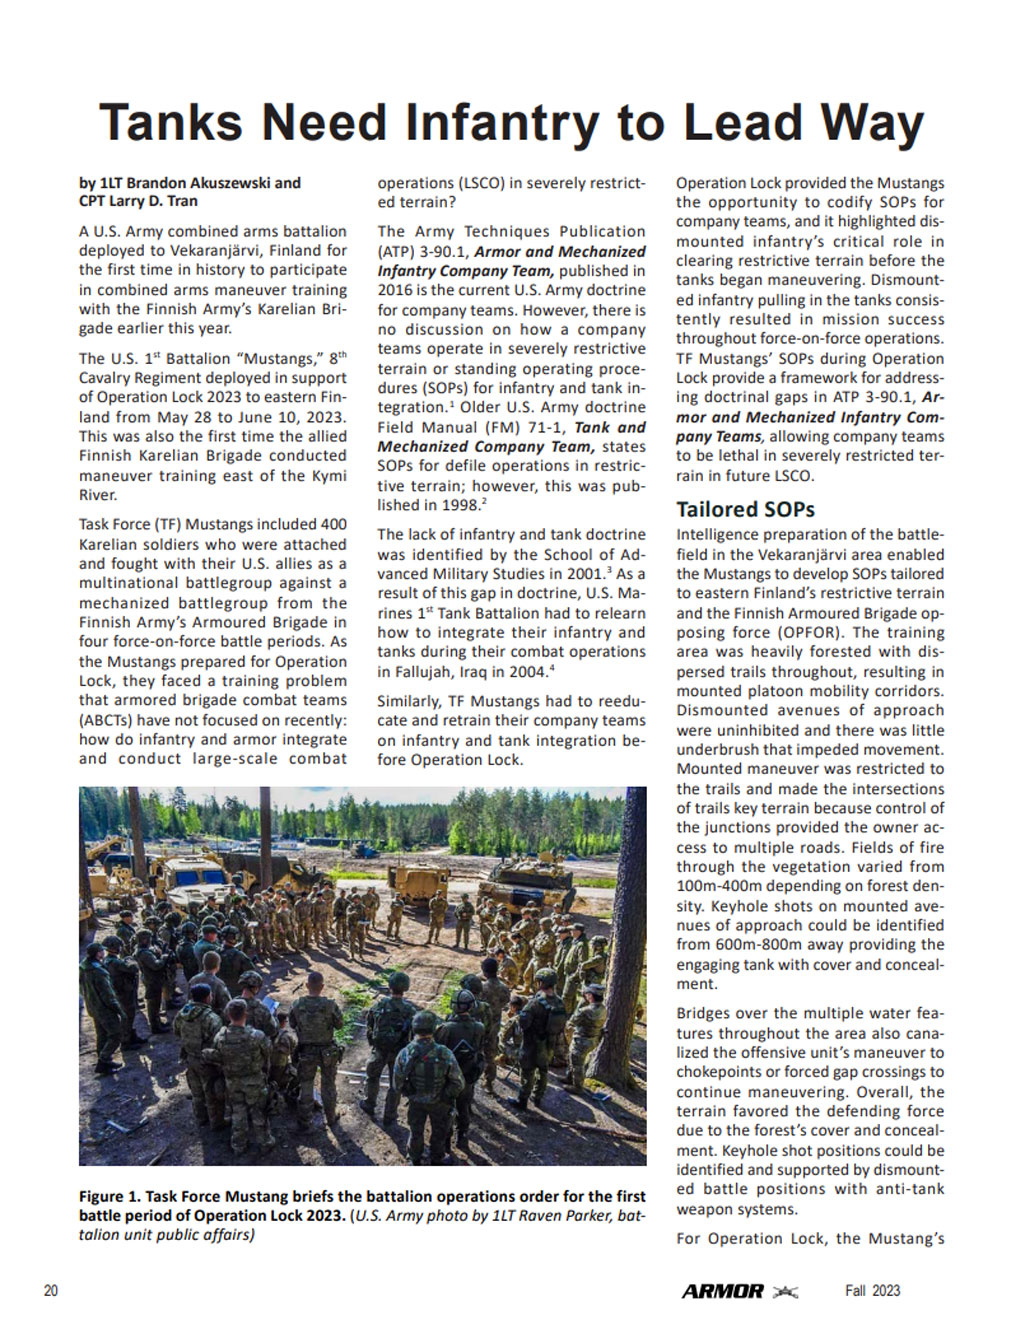 Article on assessing organizational climate and culture from a Command Sergeant Major's perspective, including a photo of soldiers in formation.